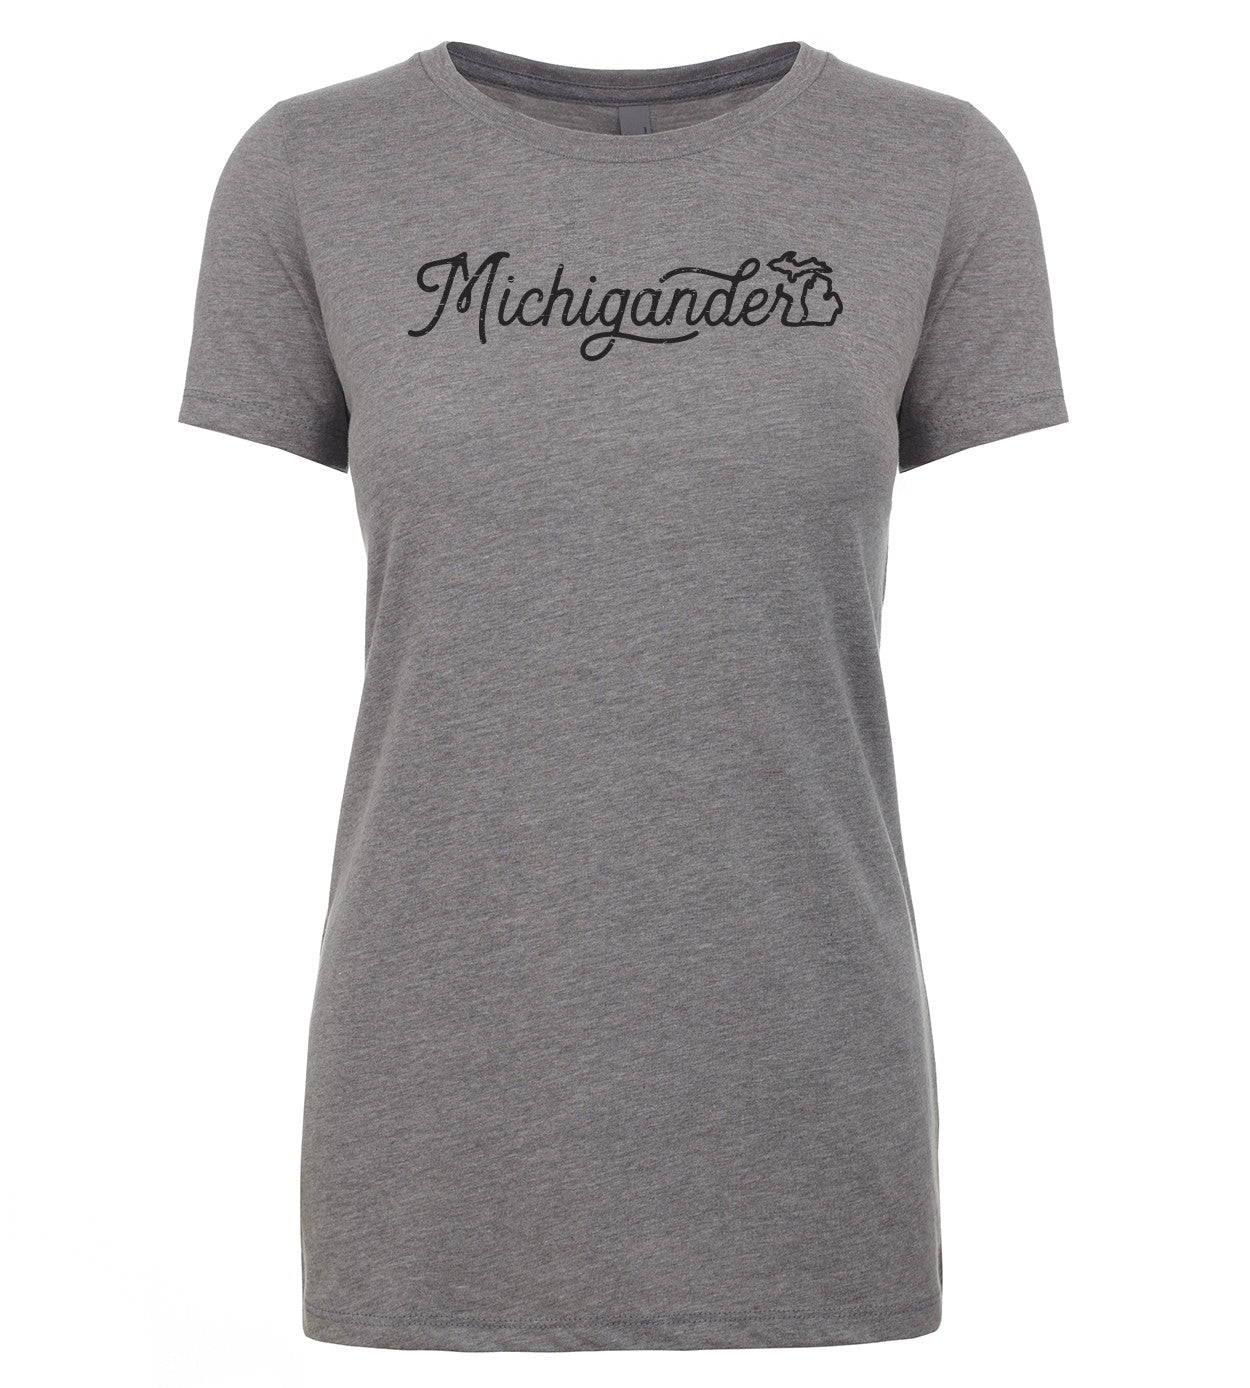 New Michigander Women's Fitted T-Shirts